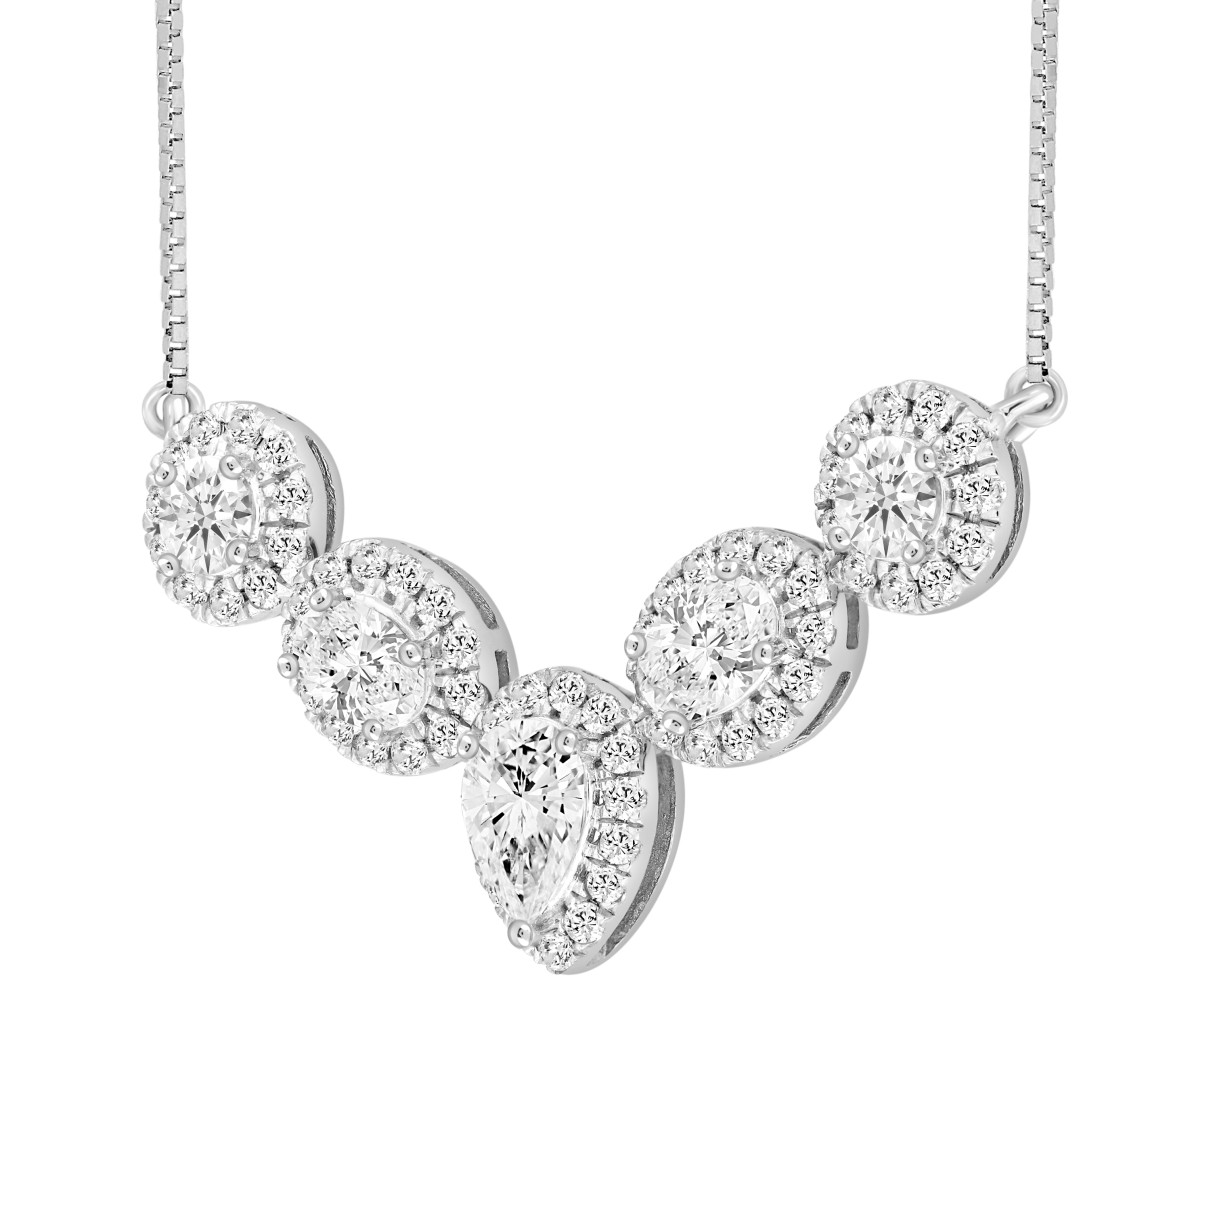 LADIES NECKLACE 2 1/2CT ROUND/PEAR/OVAL DIAMOND 14K WHITE GOLD